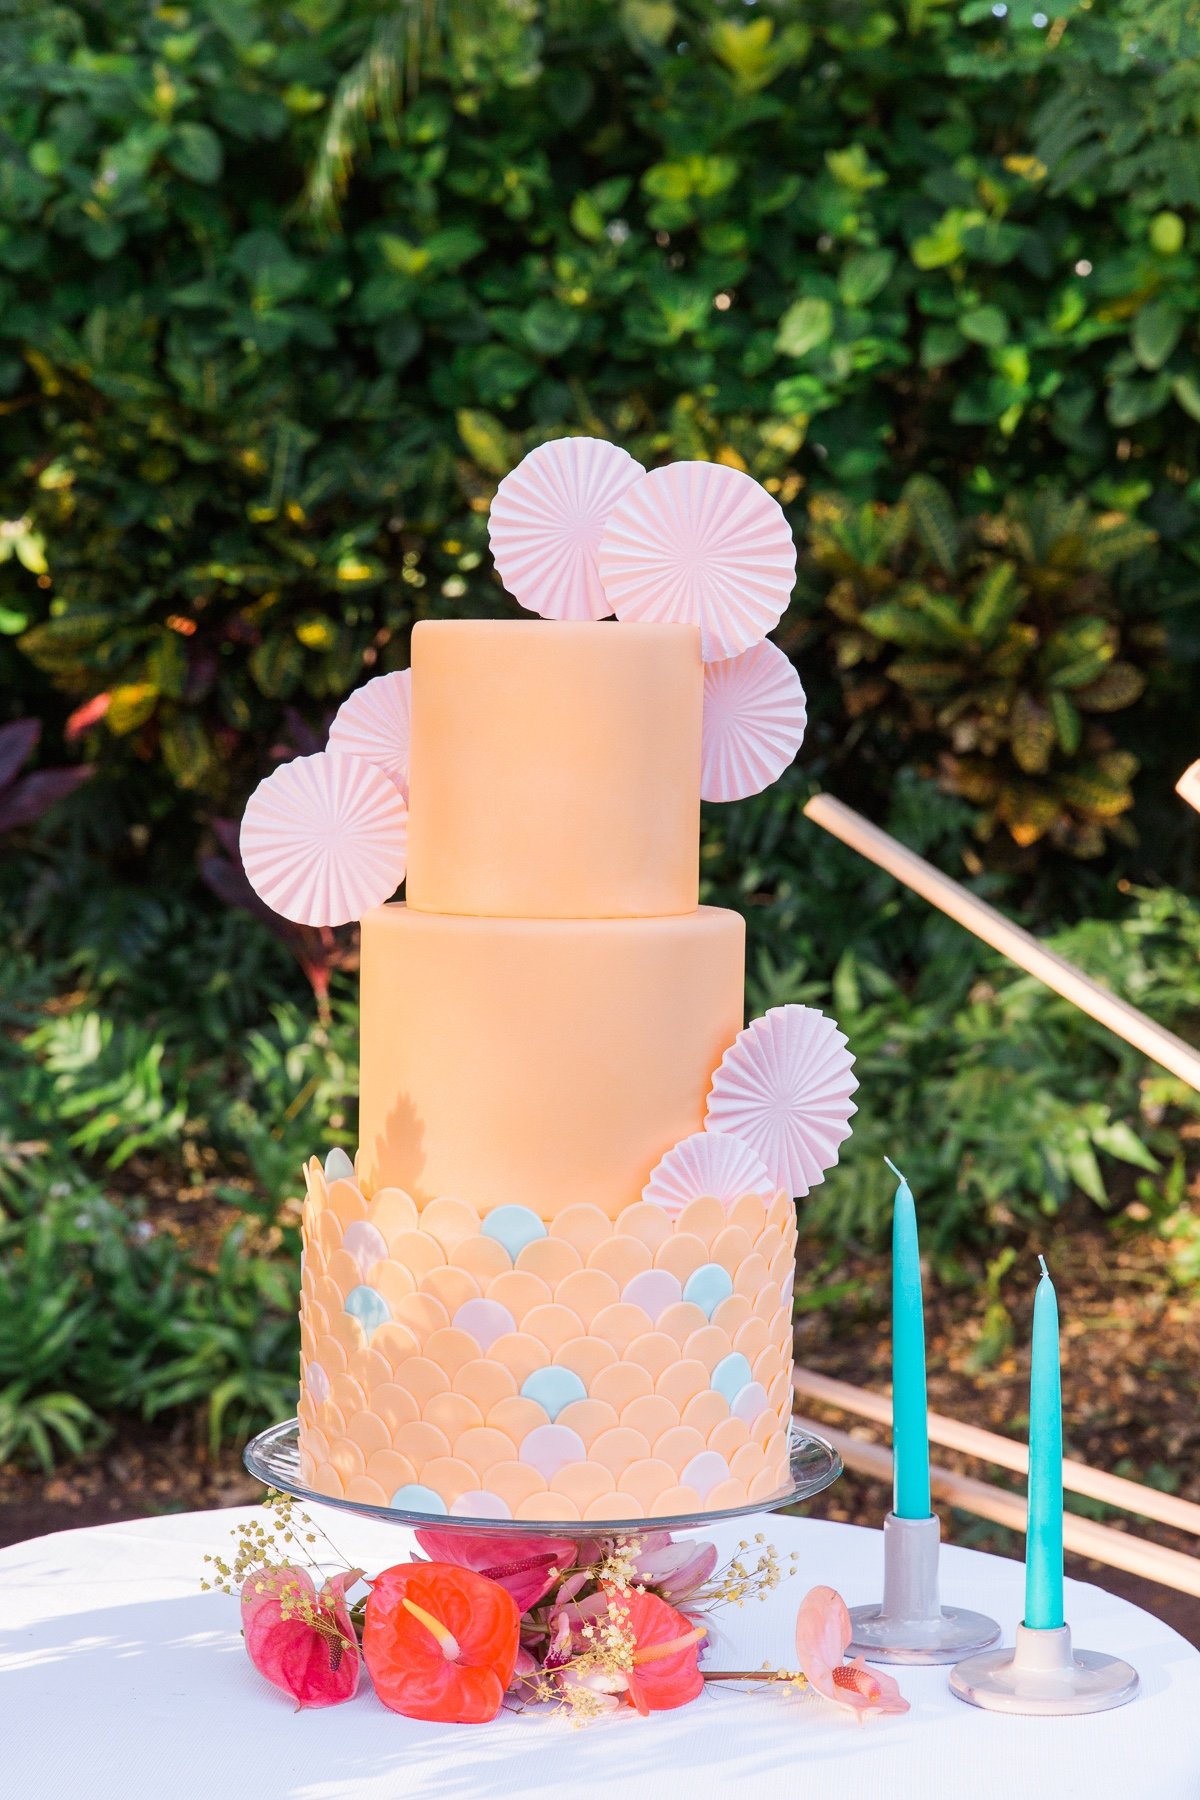 Peach wedding cake with circles designed by Magnolia at Four Seasons Resort, Hualala